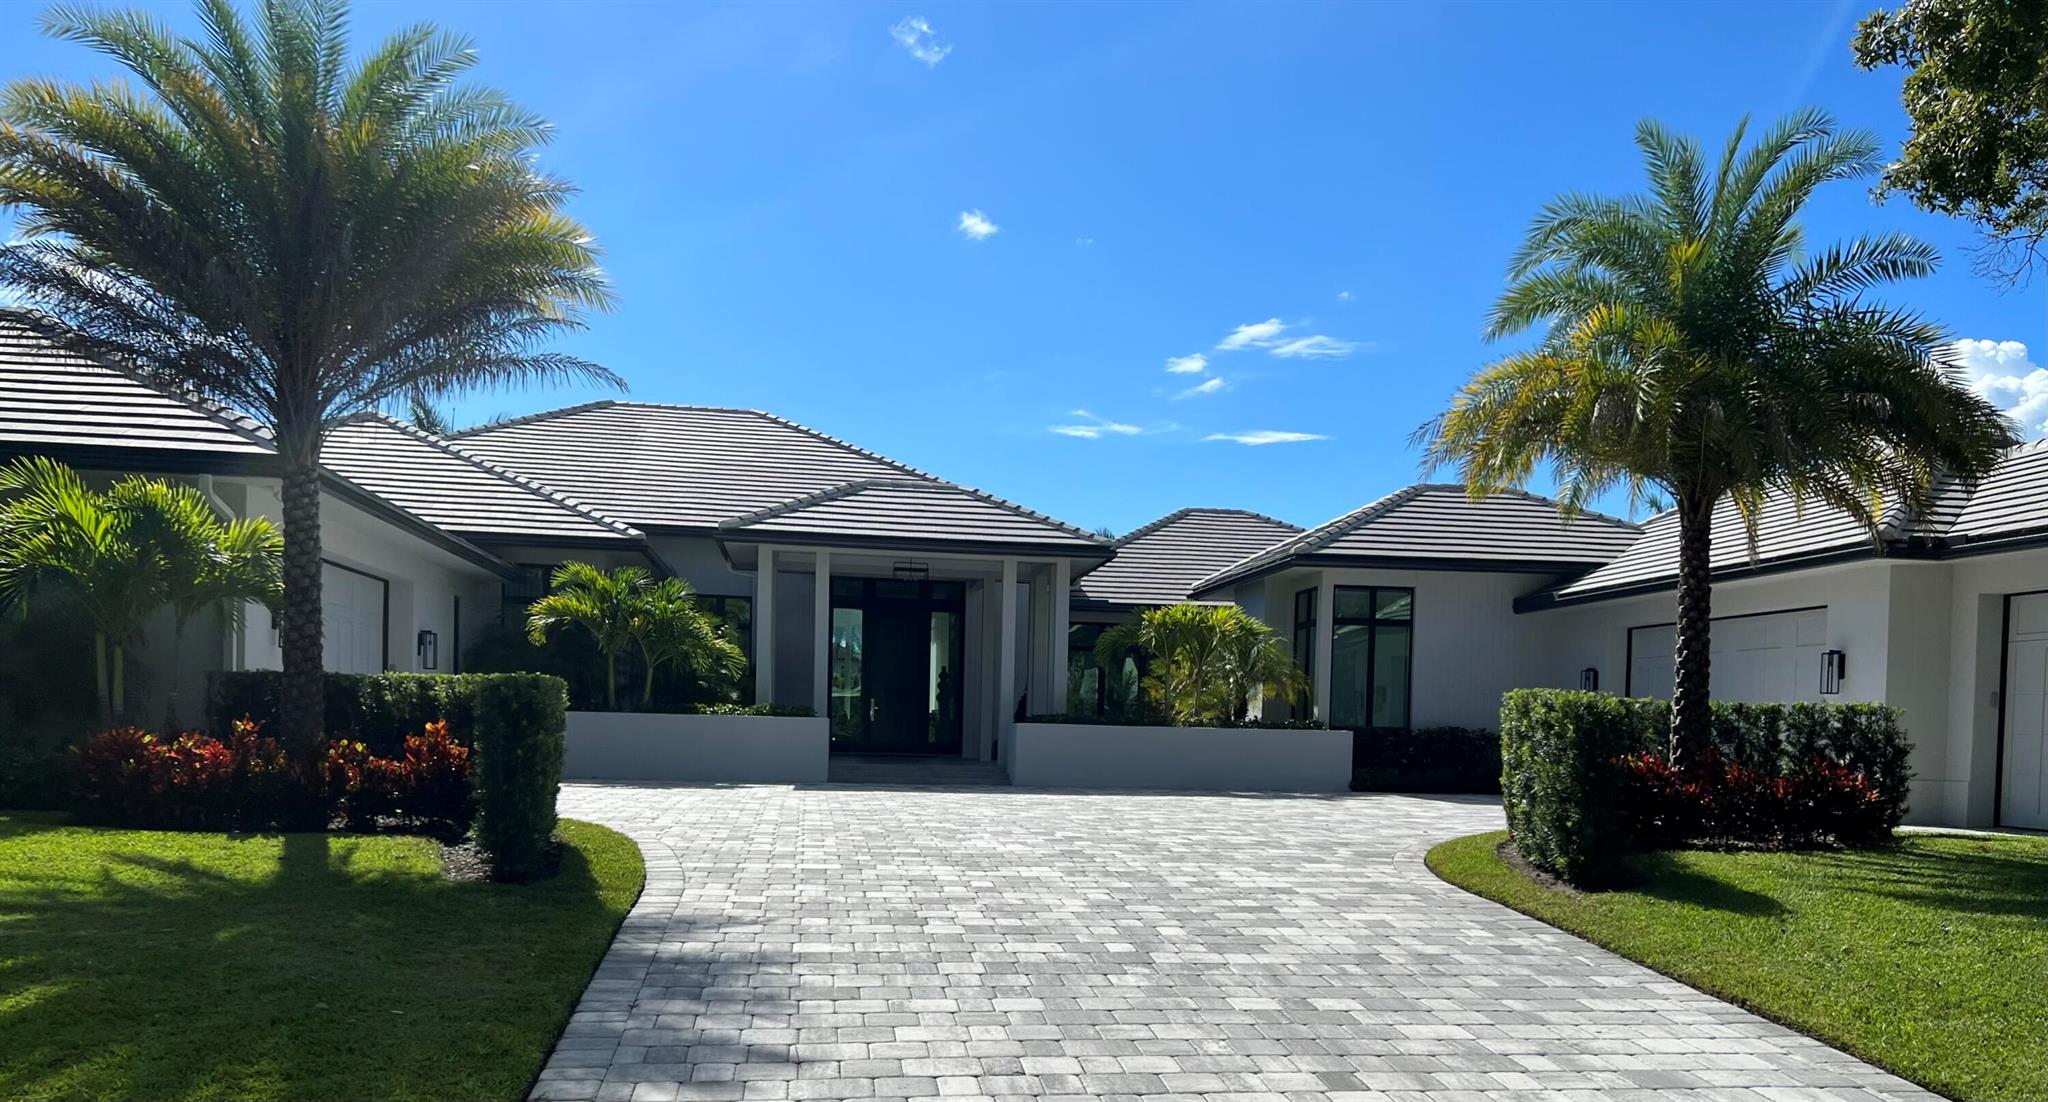 Brand new custom estate situated on arguably the prettiest custom home water lot in Frenchman's Creek for $9,750,000. Lot with current home can be purchased for $5,000,000. Situated on over 1/2 acre with long water views and total privacy, this home will feature 6,350 sf of meticulously designed living area. Showcasing unparalleled design, this Frenchman's Creek gem to be built by Le Chateau Custom Homes is accented with the finest materials. Boasting the perfect floorplan for living and entertaining with expansive indoor and outdoor living including a large club/media room, office, and 5 spacious bedroom suites. The grand owners suite offers tremendous privacy, hosts luxurious his and her baths, huge closets and pristine views. The kitchen is a chef's dream, Downsview cabinetry with top of the line appliances and separate breakfast area with breathtaking views leading to the outdoor dining area. The outdoor living areas are extraordinary, with pool &amp; spa and huge outdoor entertaining area with summer kitchen and retractable screens.  Some other additional features are a whole house generator, 4 car garage and so much more.  This home truly offers everything imaginable for the most discriminating &amp; sophisticated buyer...it's as good as it gets.